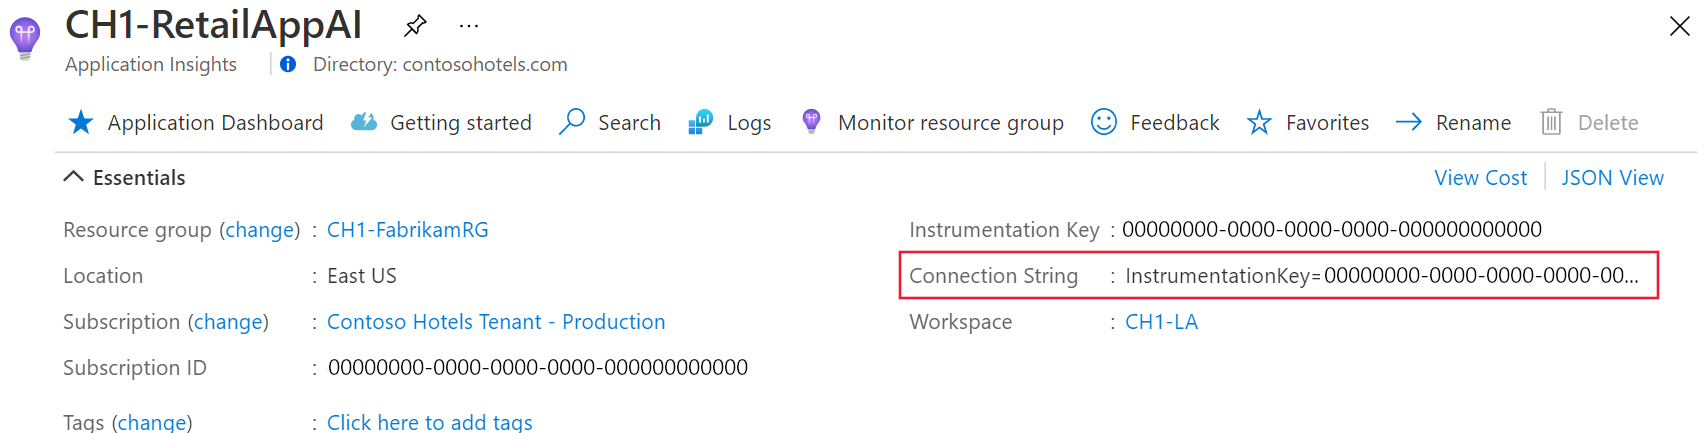 Screenshot of the Application Insights connection string.